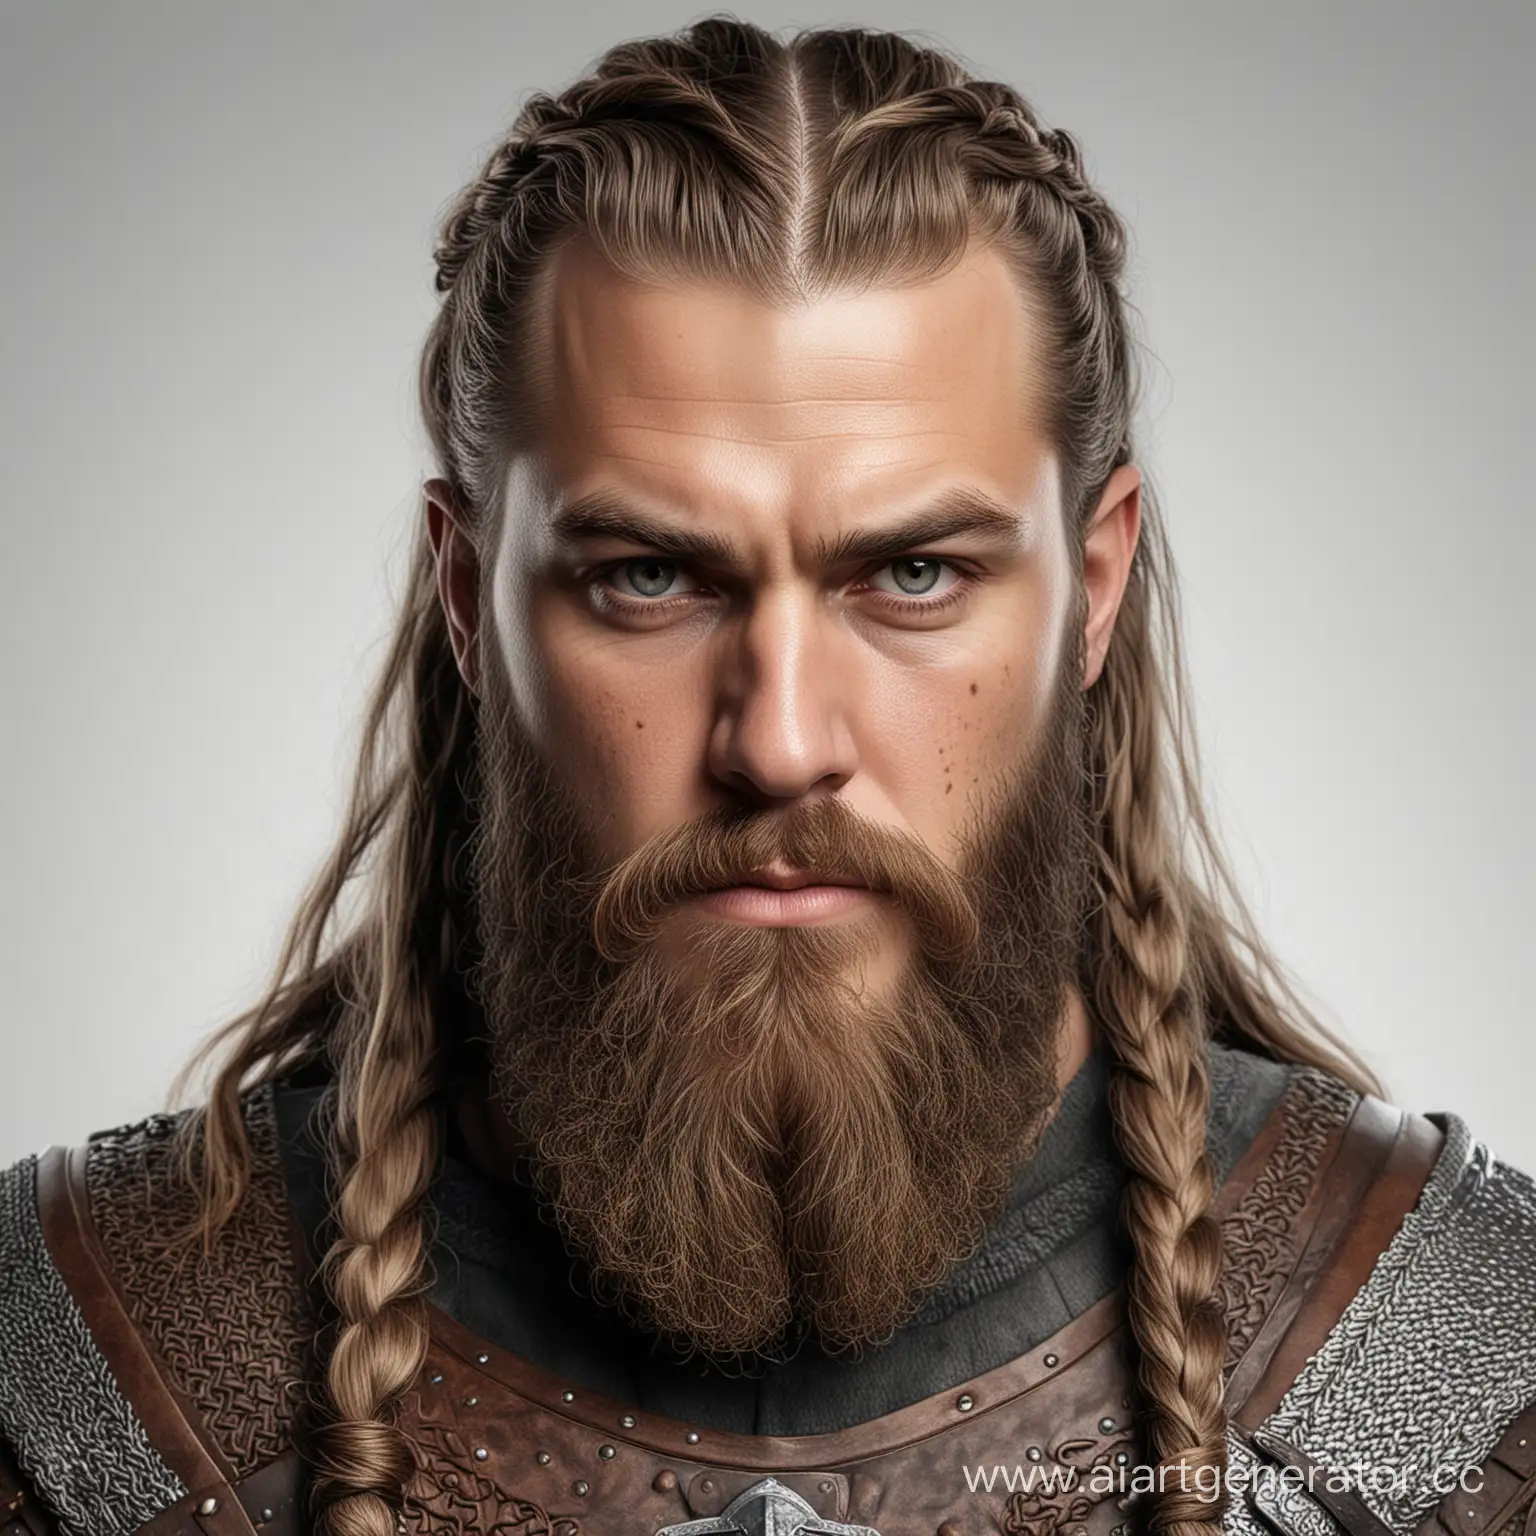 Serious-Viking-Warrior-with-Braided-Beard-and-Armor-on-White-Background